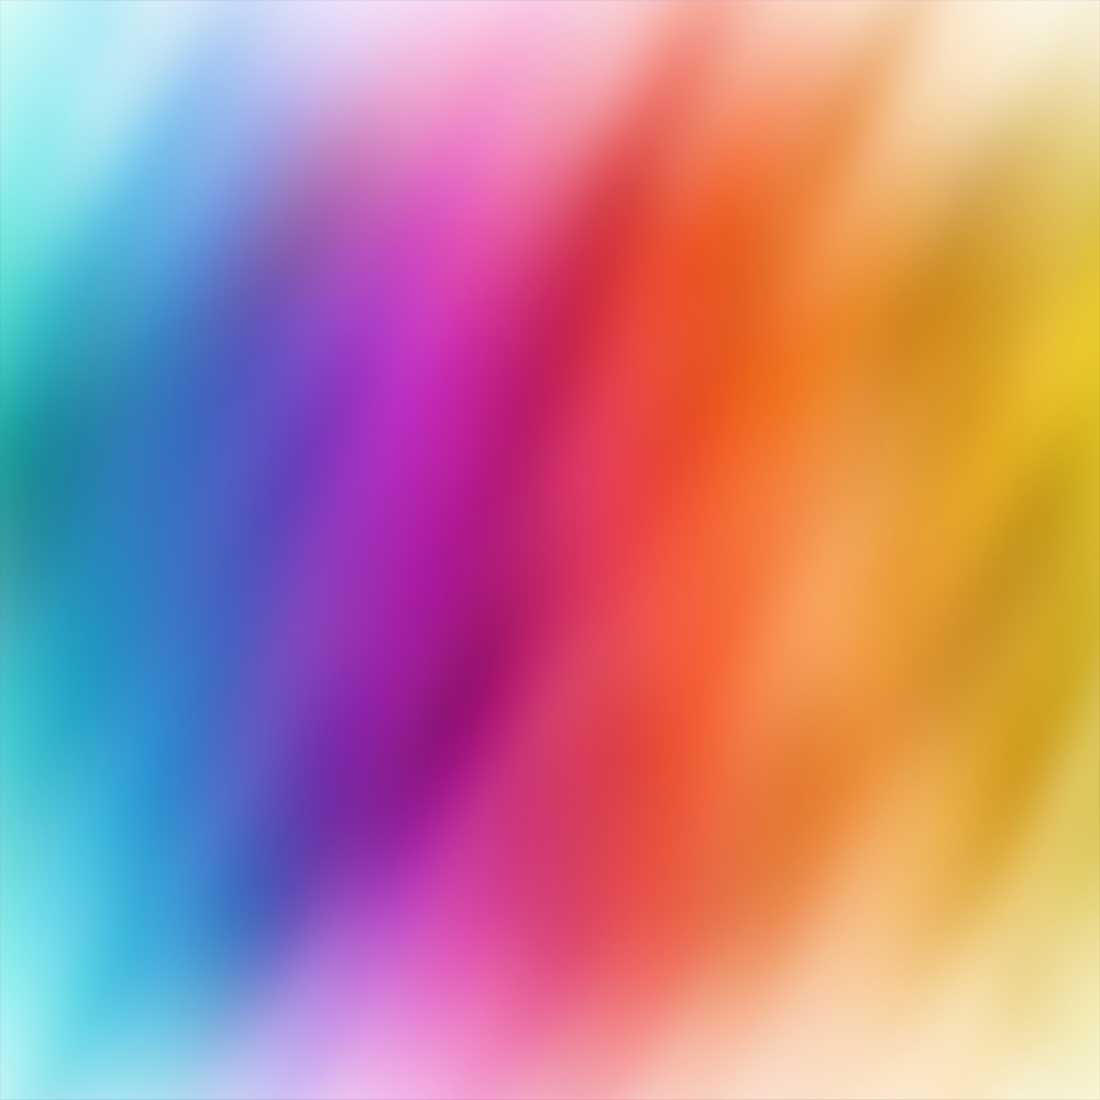 Abstract Gradient Background Luxury Vivid Blurred Colorful Texture Wallpaper Photo cover image.